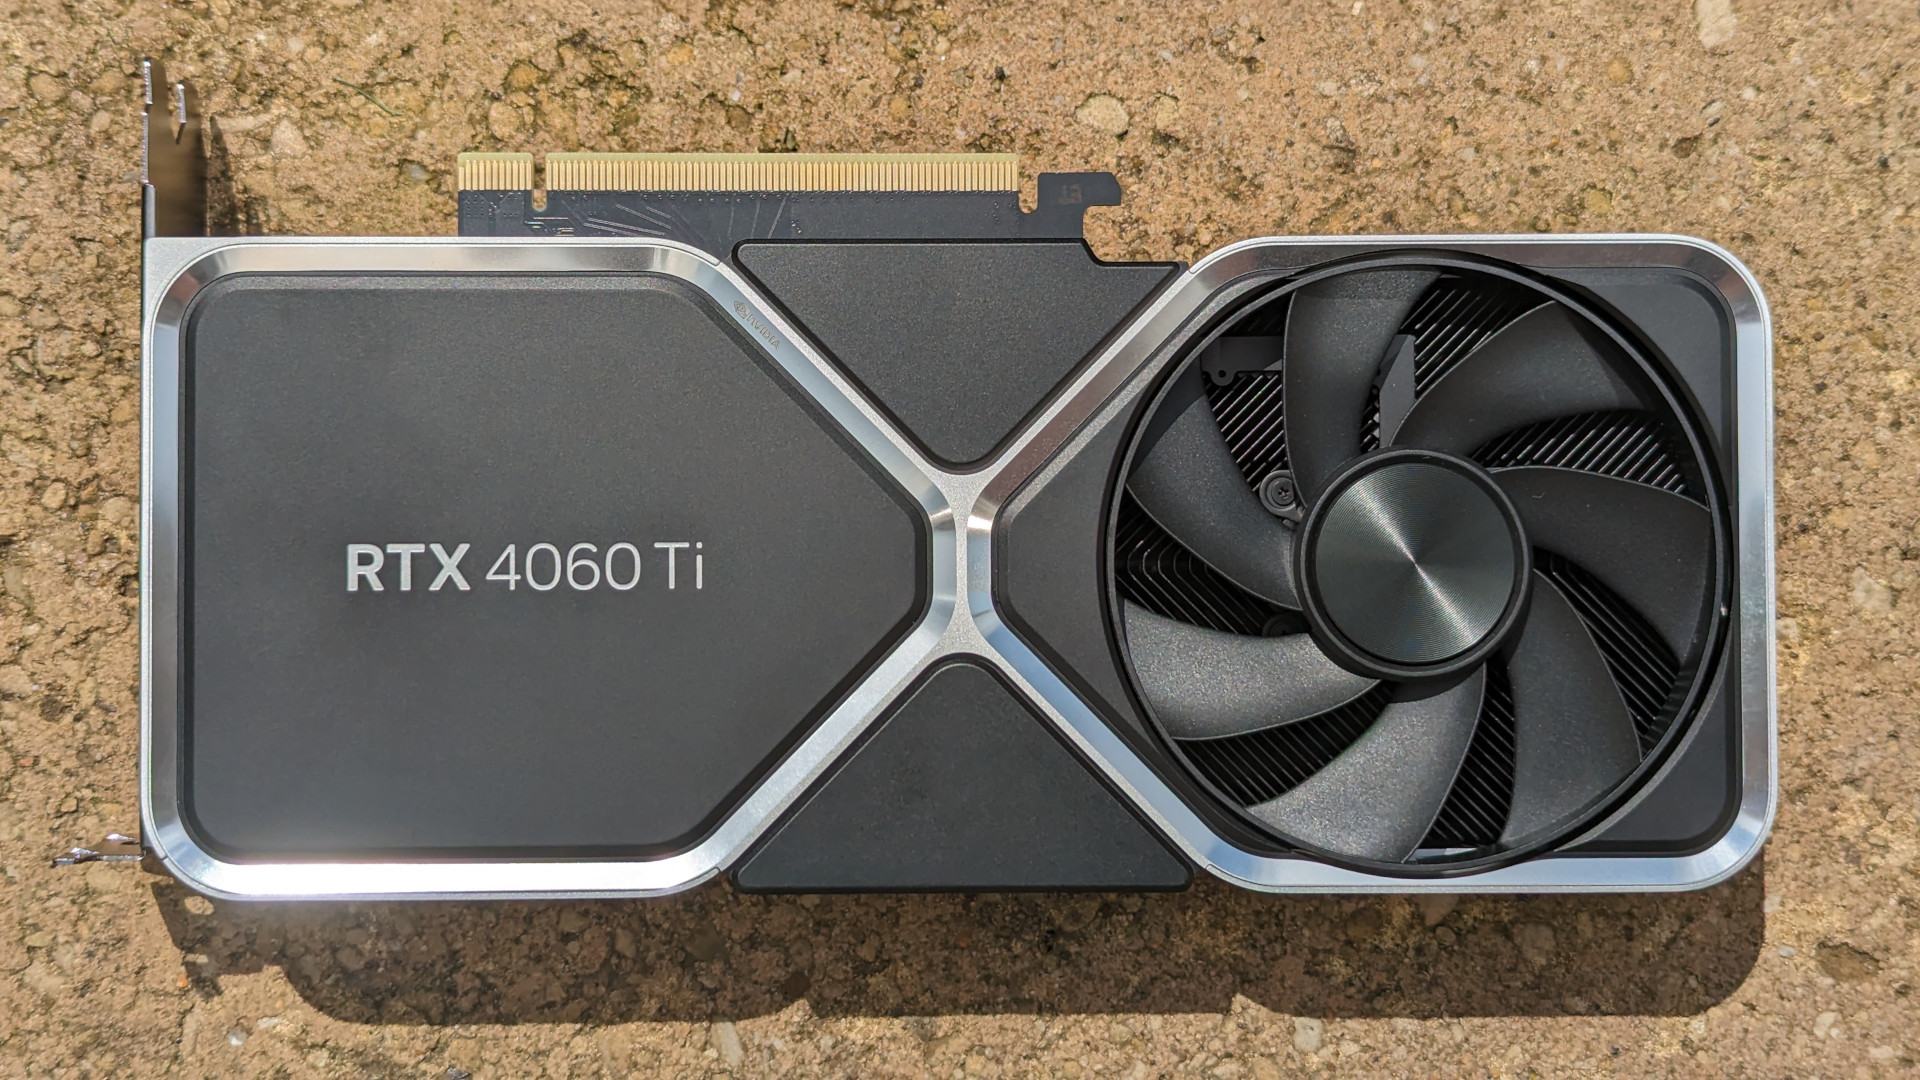 Nvidia GeForce RTX 4060 Ti 8GB review: The graphics card lies on top of warm stone